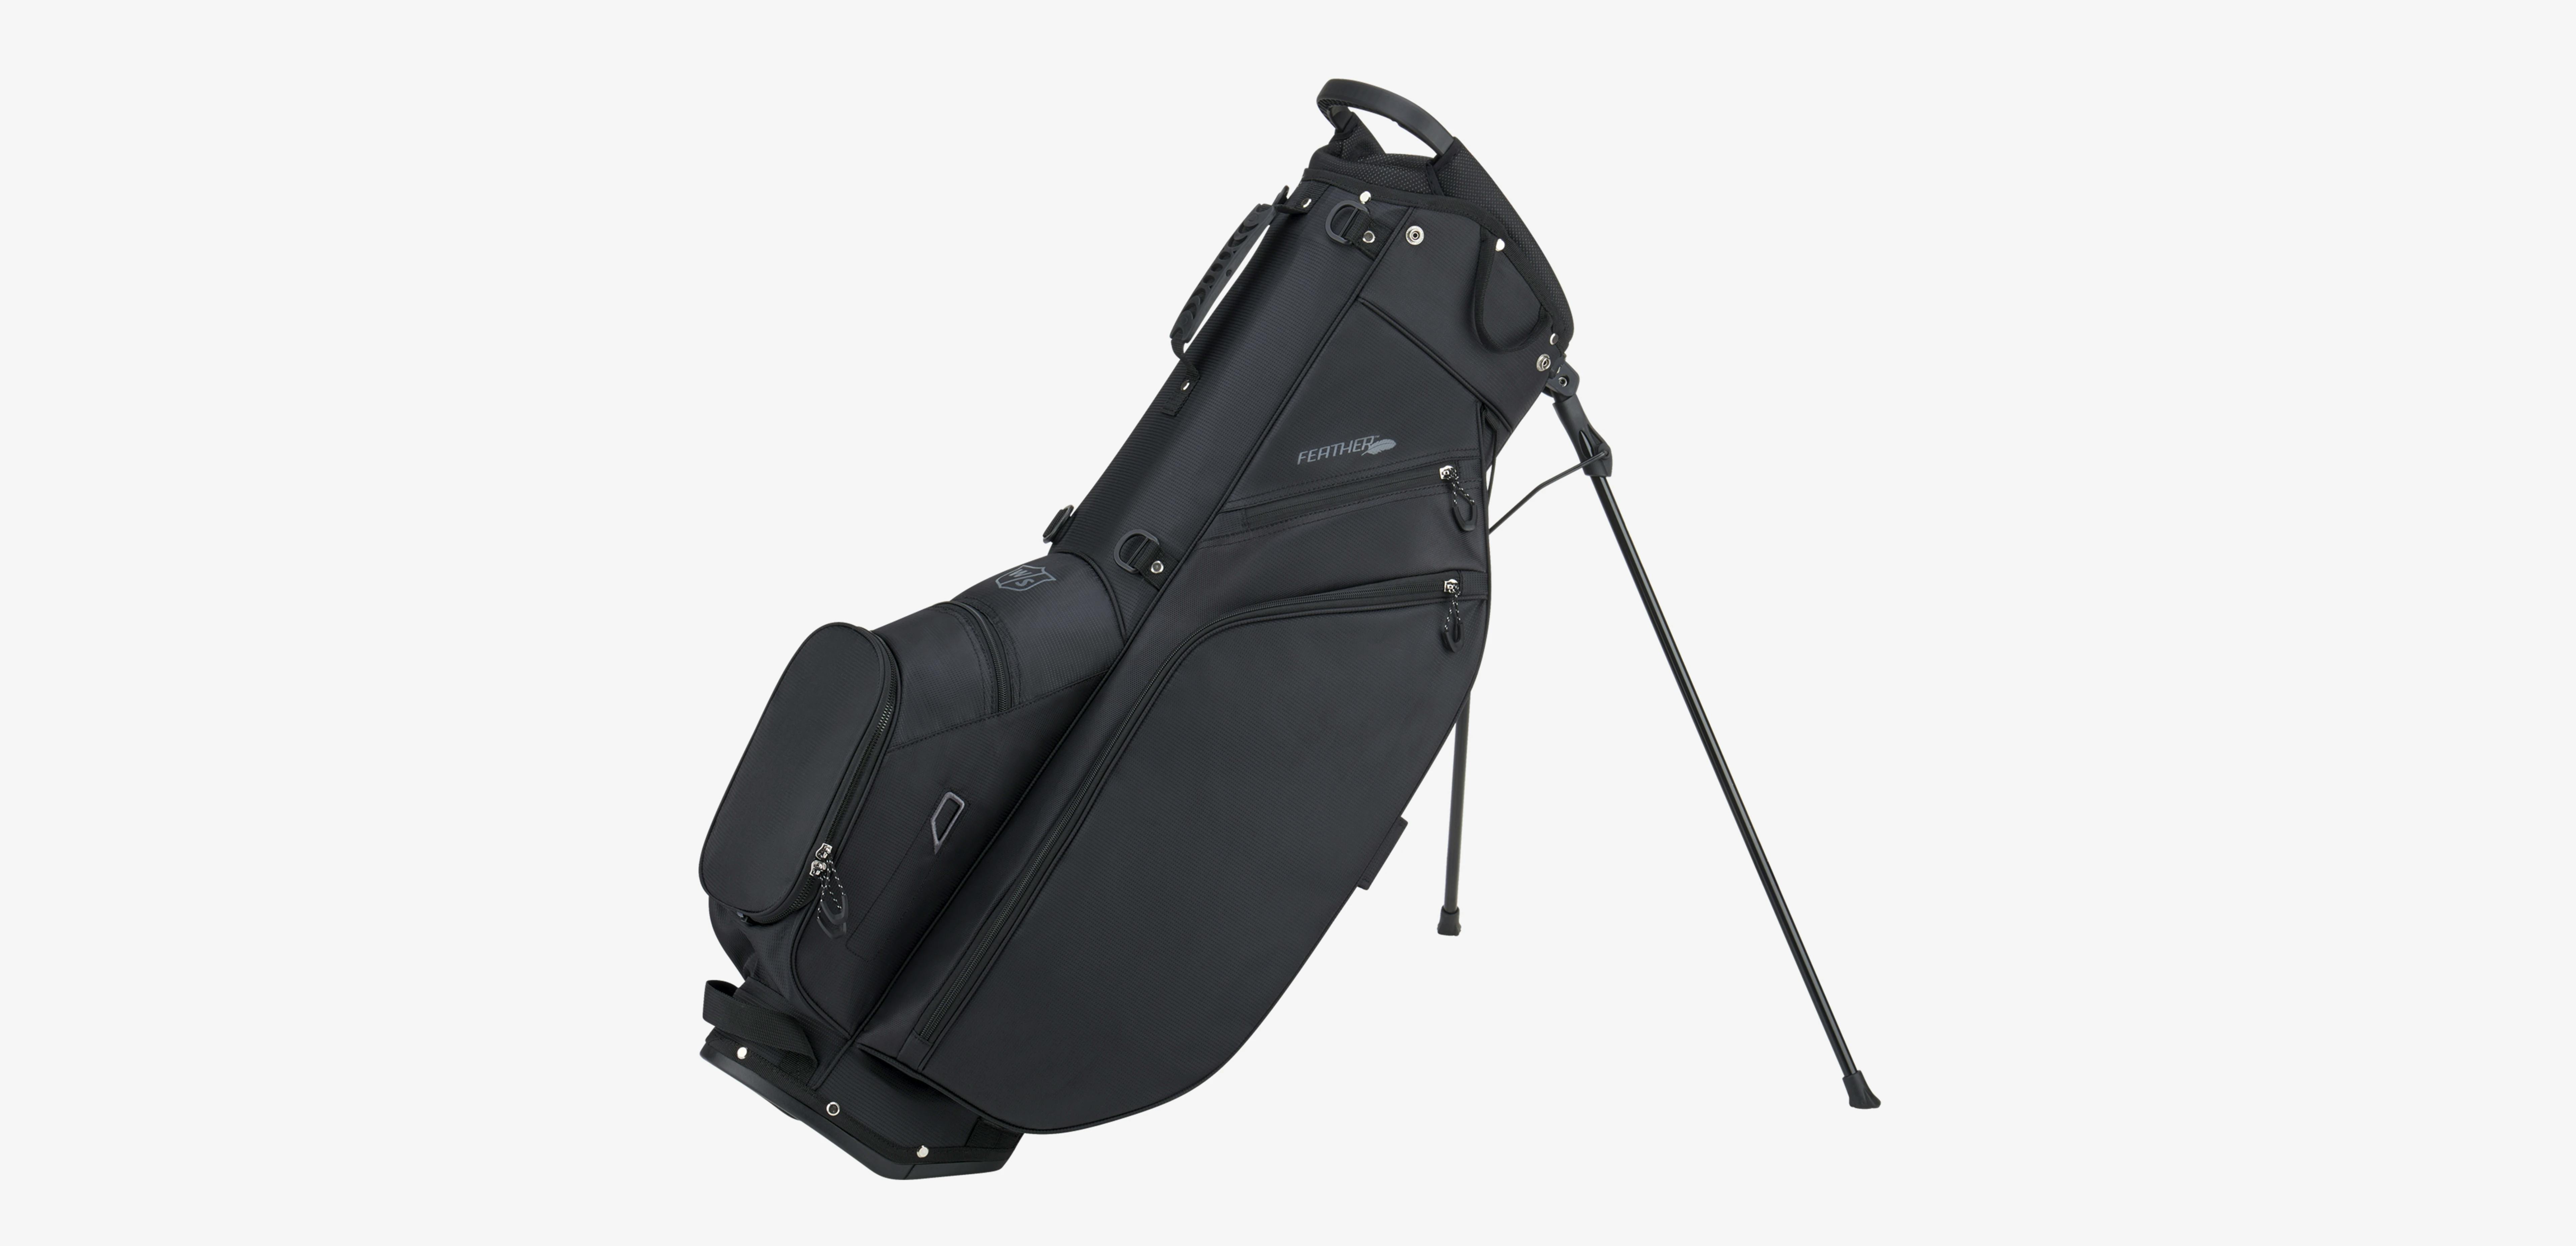 Wilson Feather Golf Stand Bag